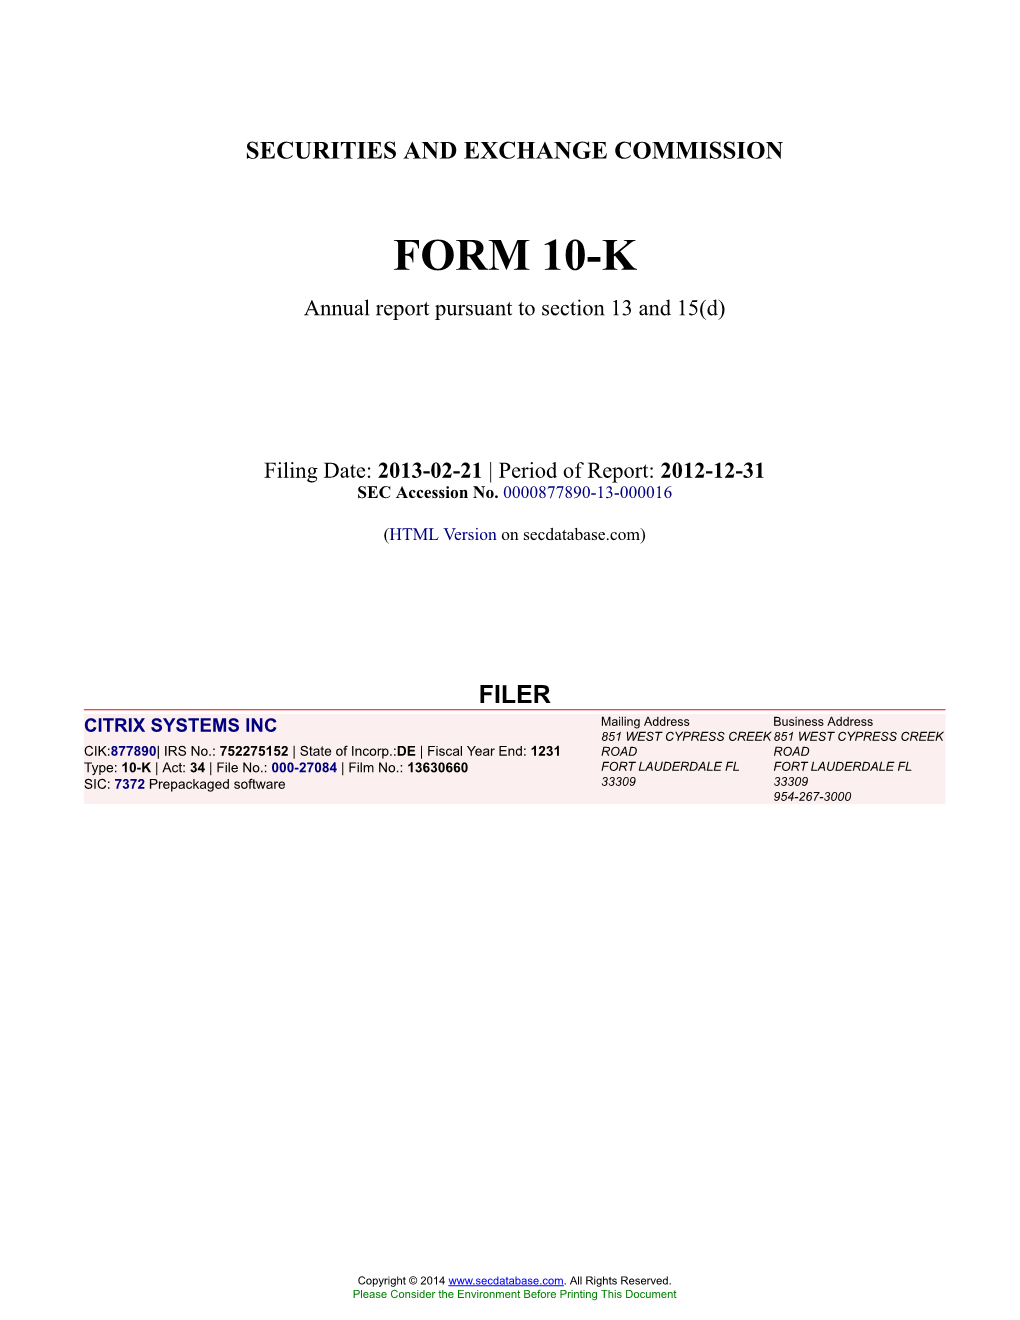 CITRIX SYSTEMS INC Form 10-K Annual Report Filed 2013-02-21